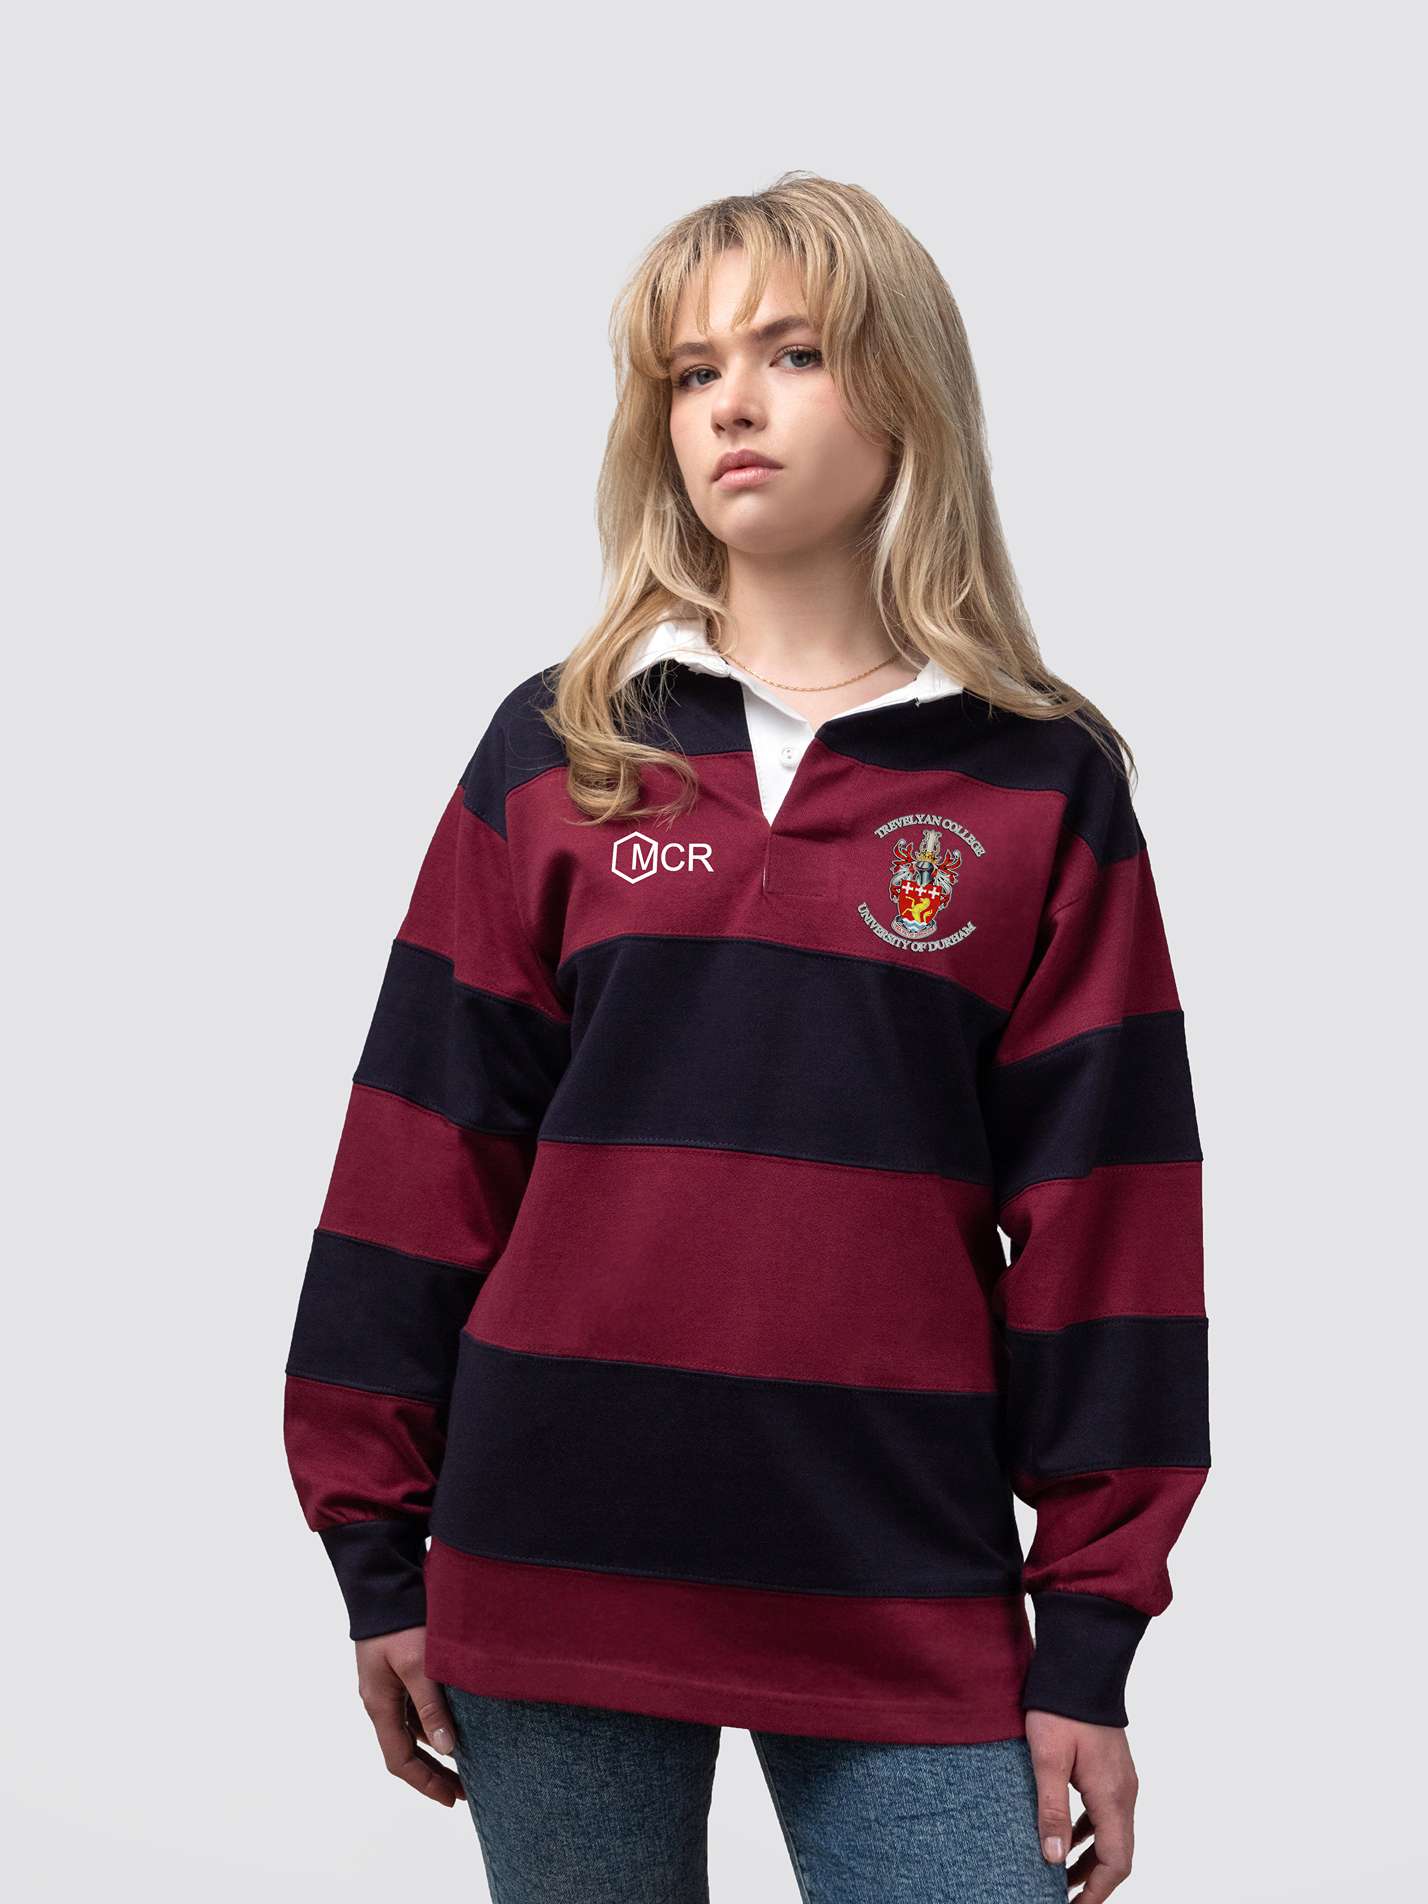 Trevelyan College rugby shirt, with burgundy and navy stripes